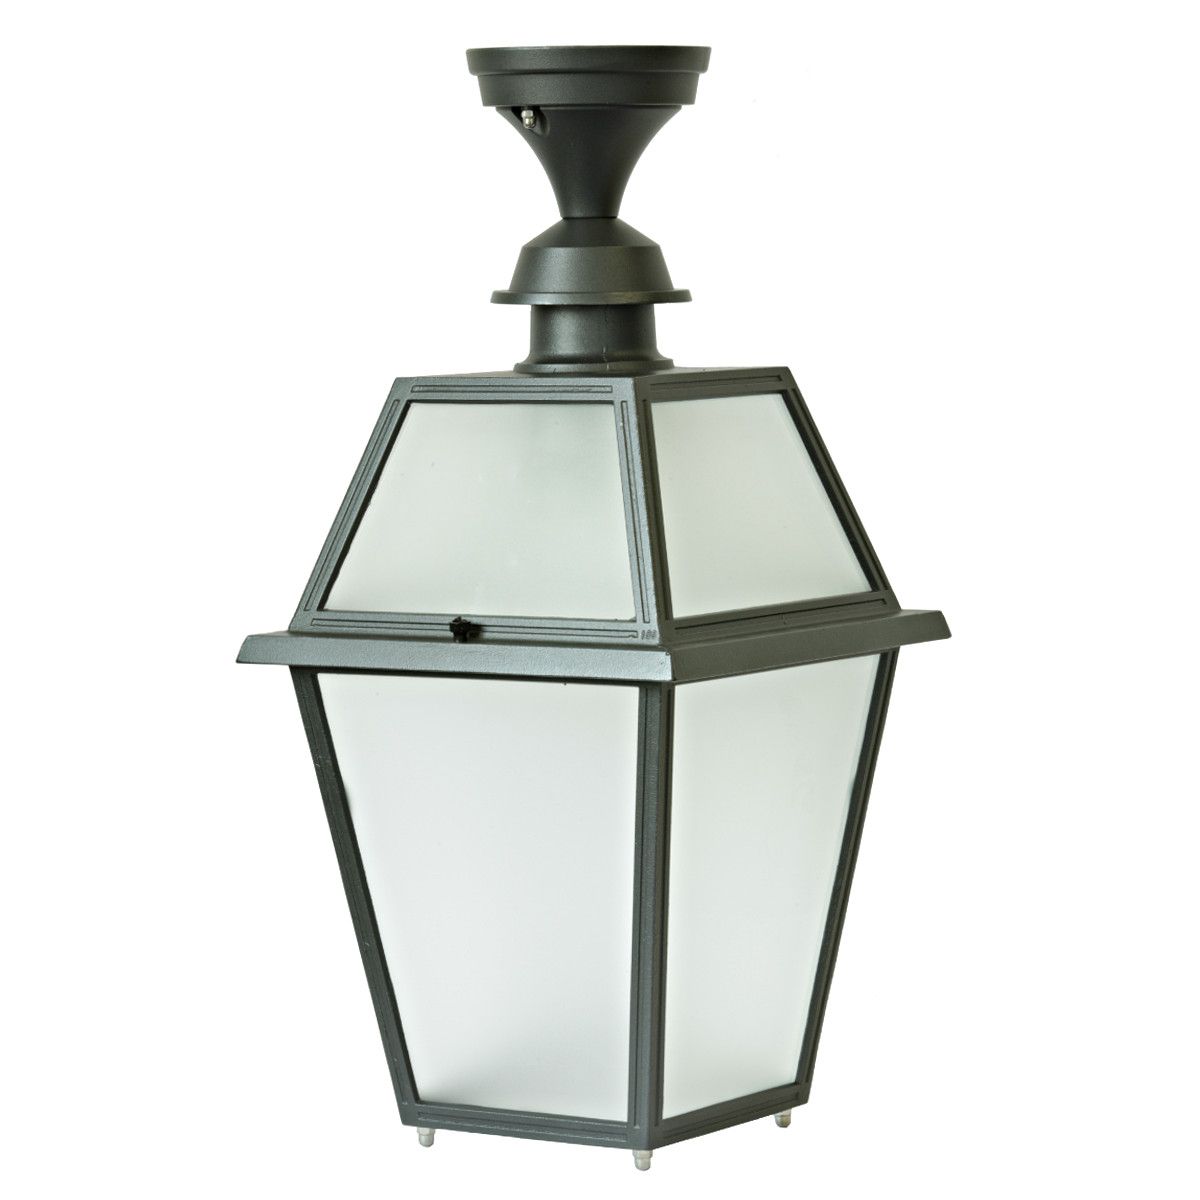 Large Outdoor Ceiling Light